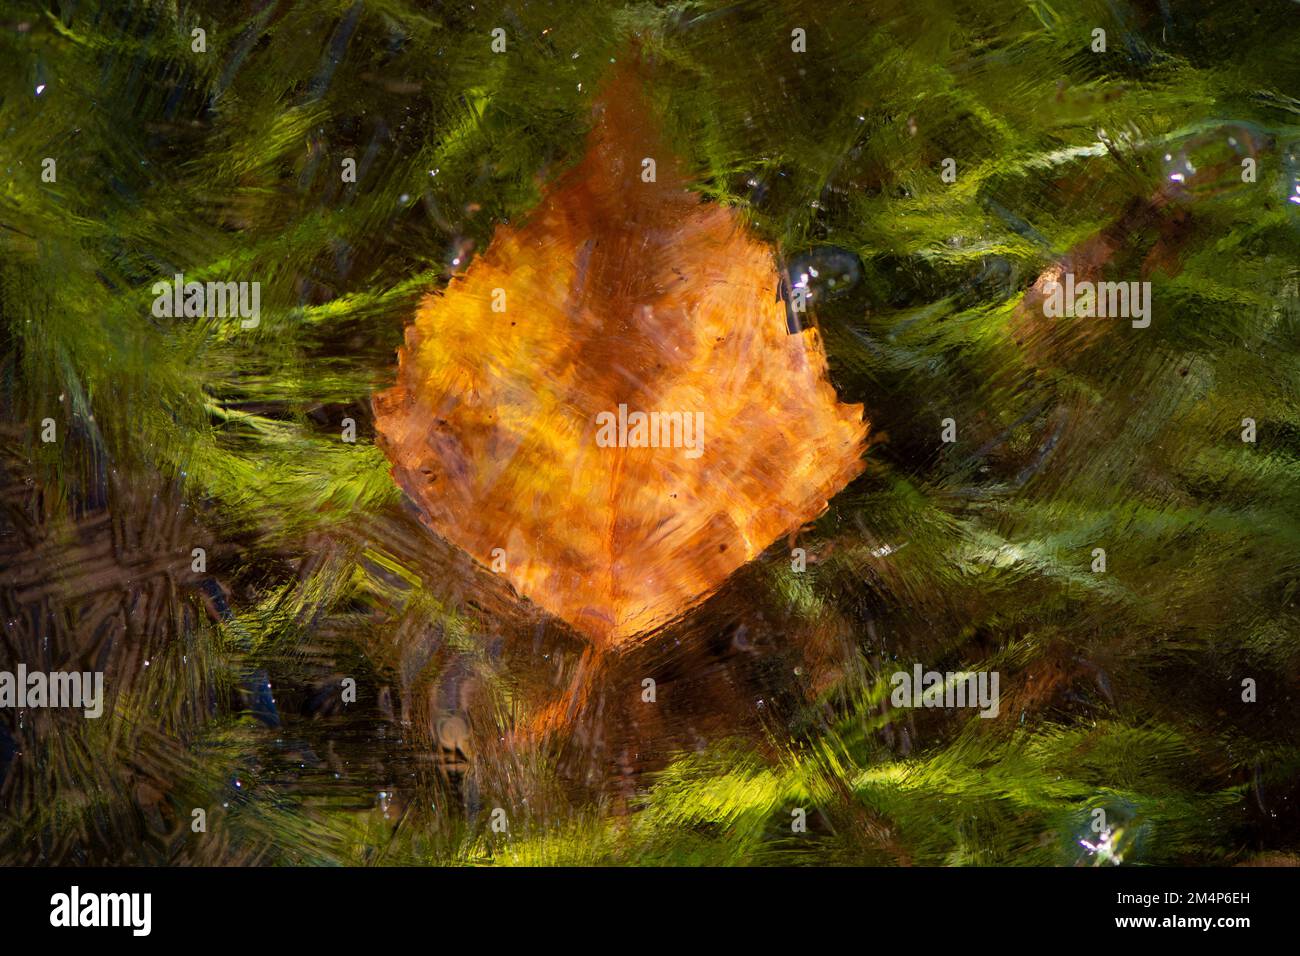 A single orange birch leaf captured under ice of a stream against a green background of stream grass. The image resembles a old master painting. Stock Photo